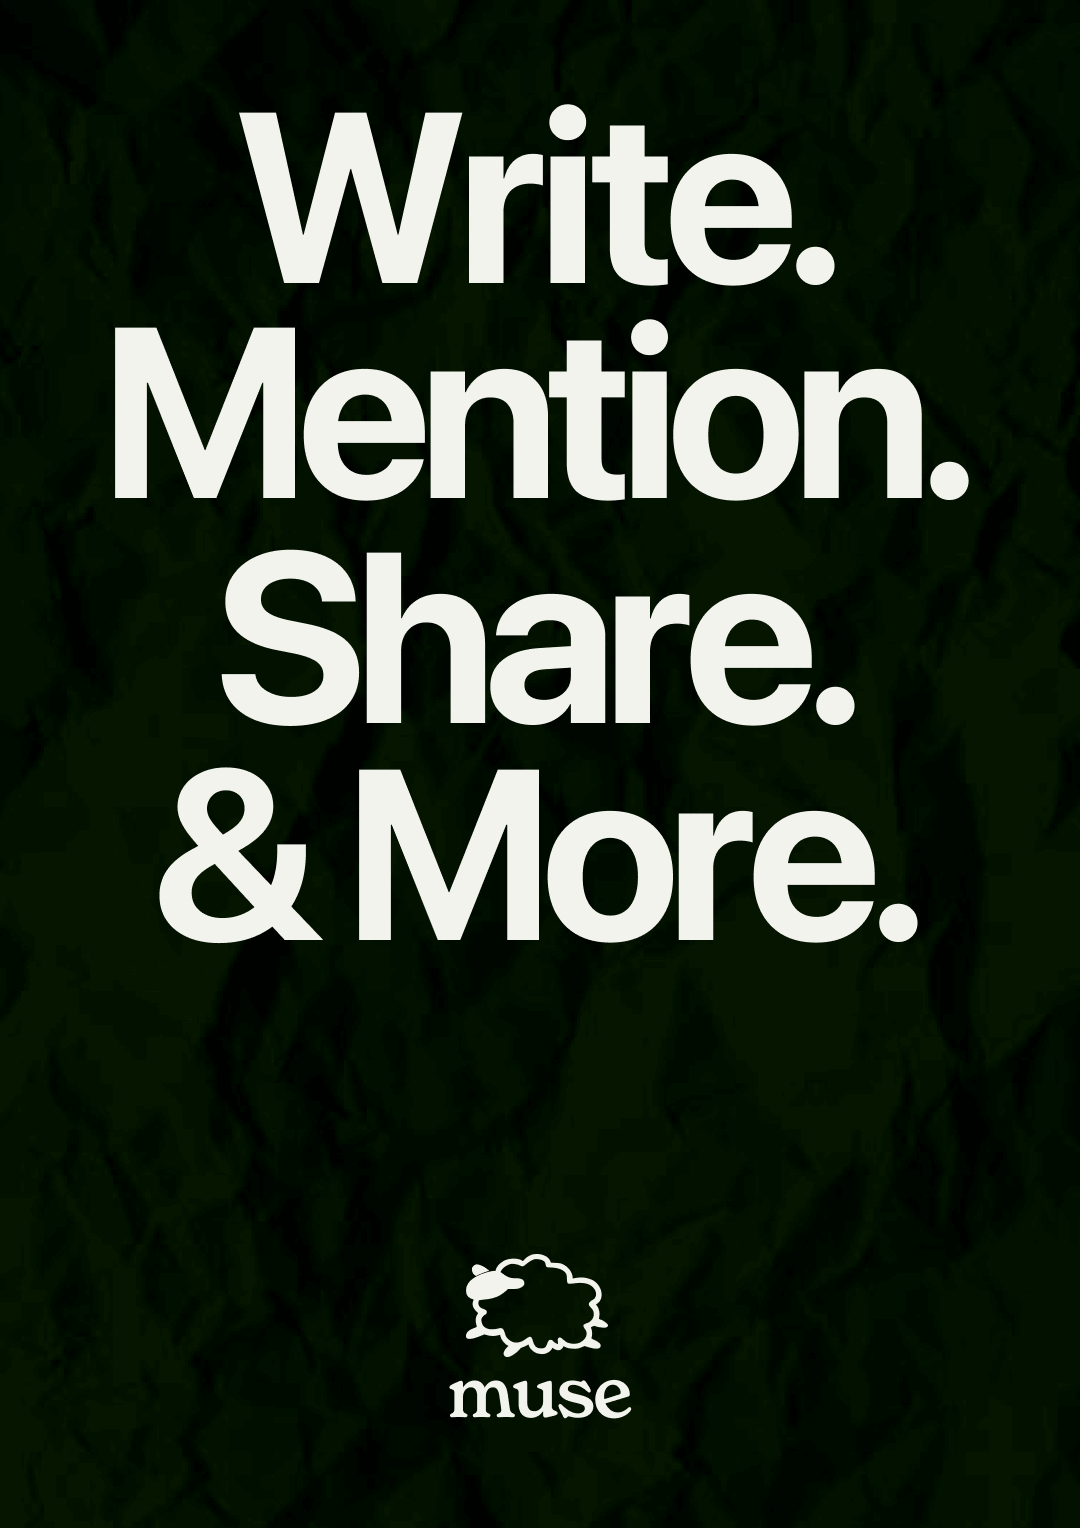 A poster that says 'Write. Mention. And More.' And a text logo written as muse on the bottom right.